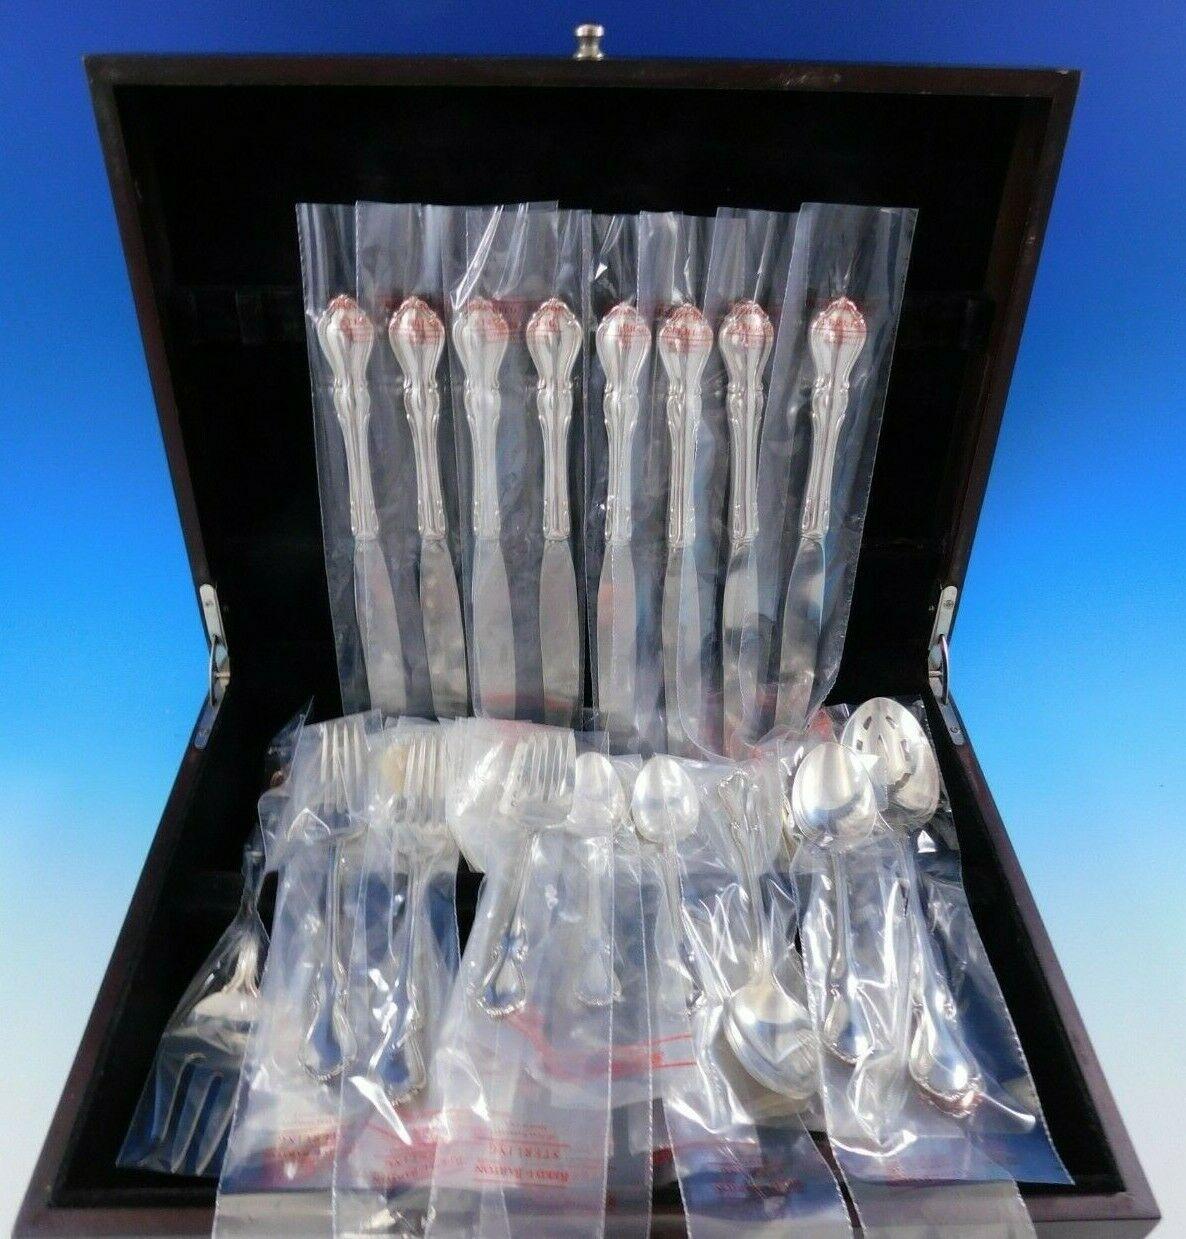 New in factory sleeves, Hampton Court by Reed and Barton sterling silver flatware set - 44 pieces. This set includes:

8 knives, 9 1/8